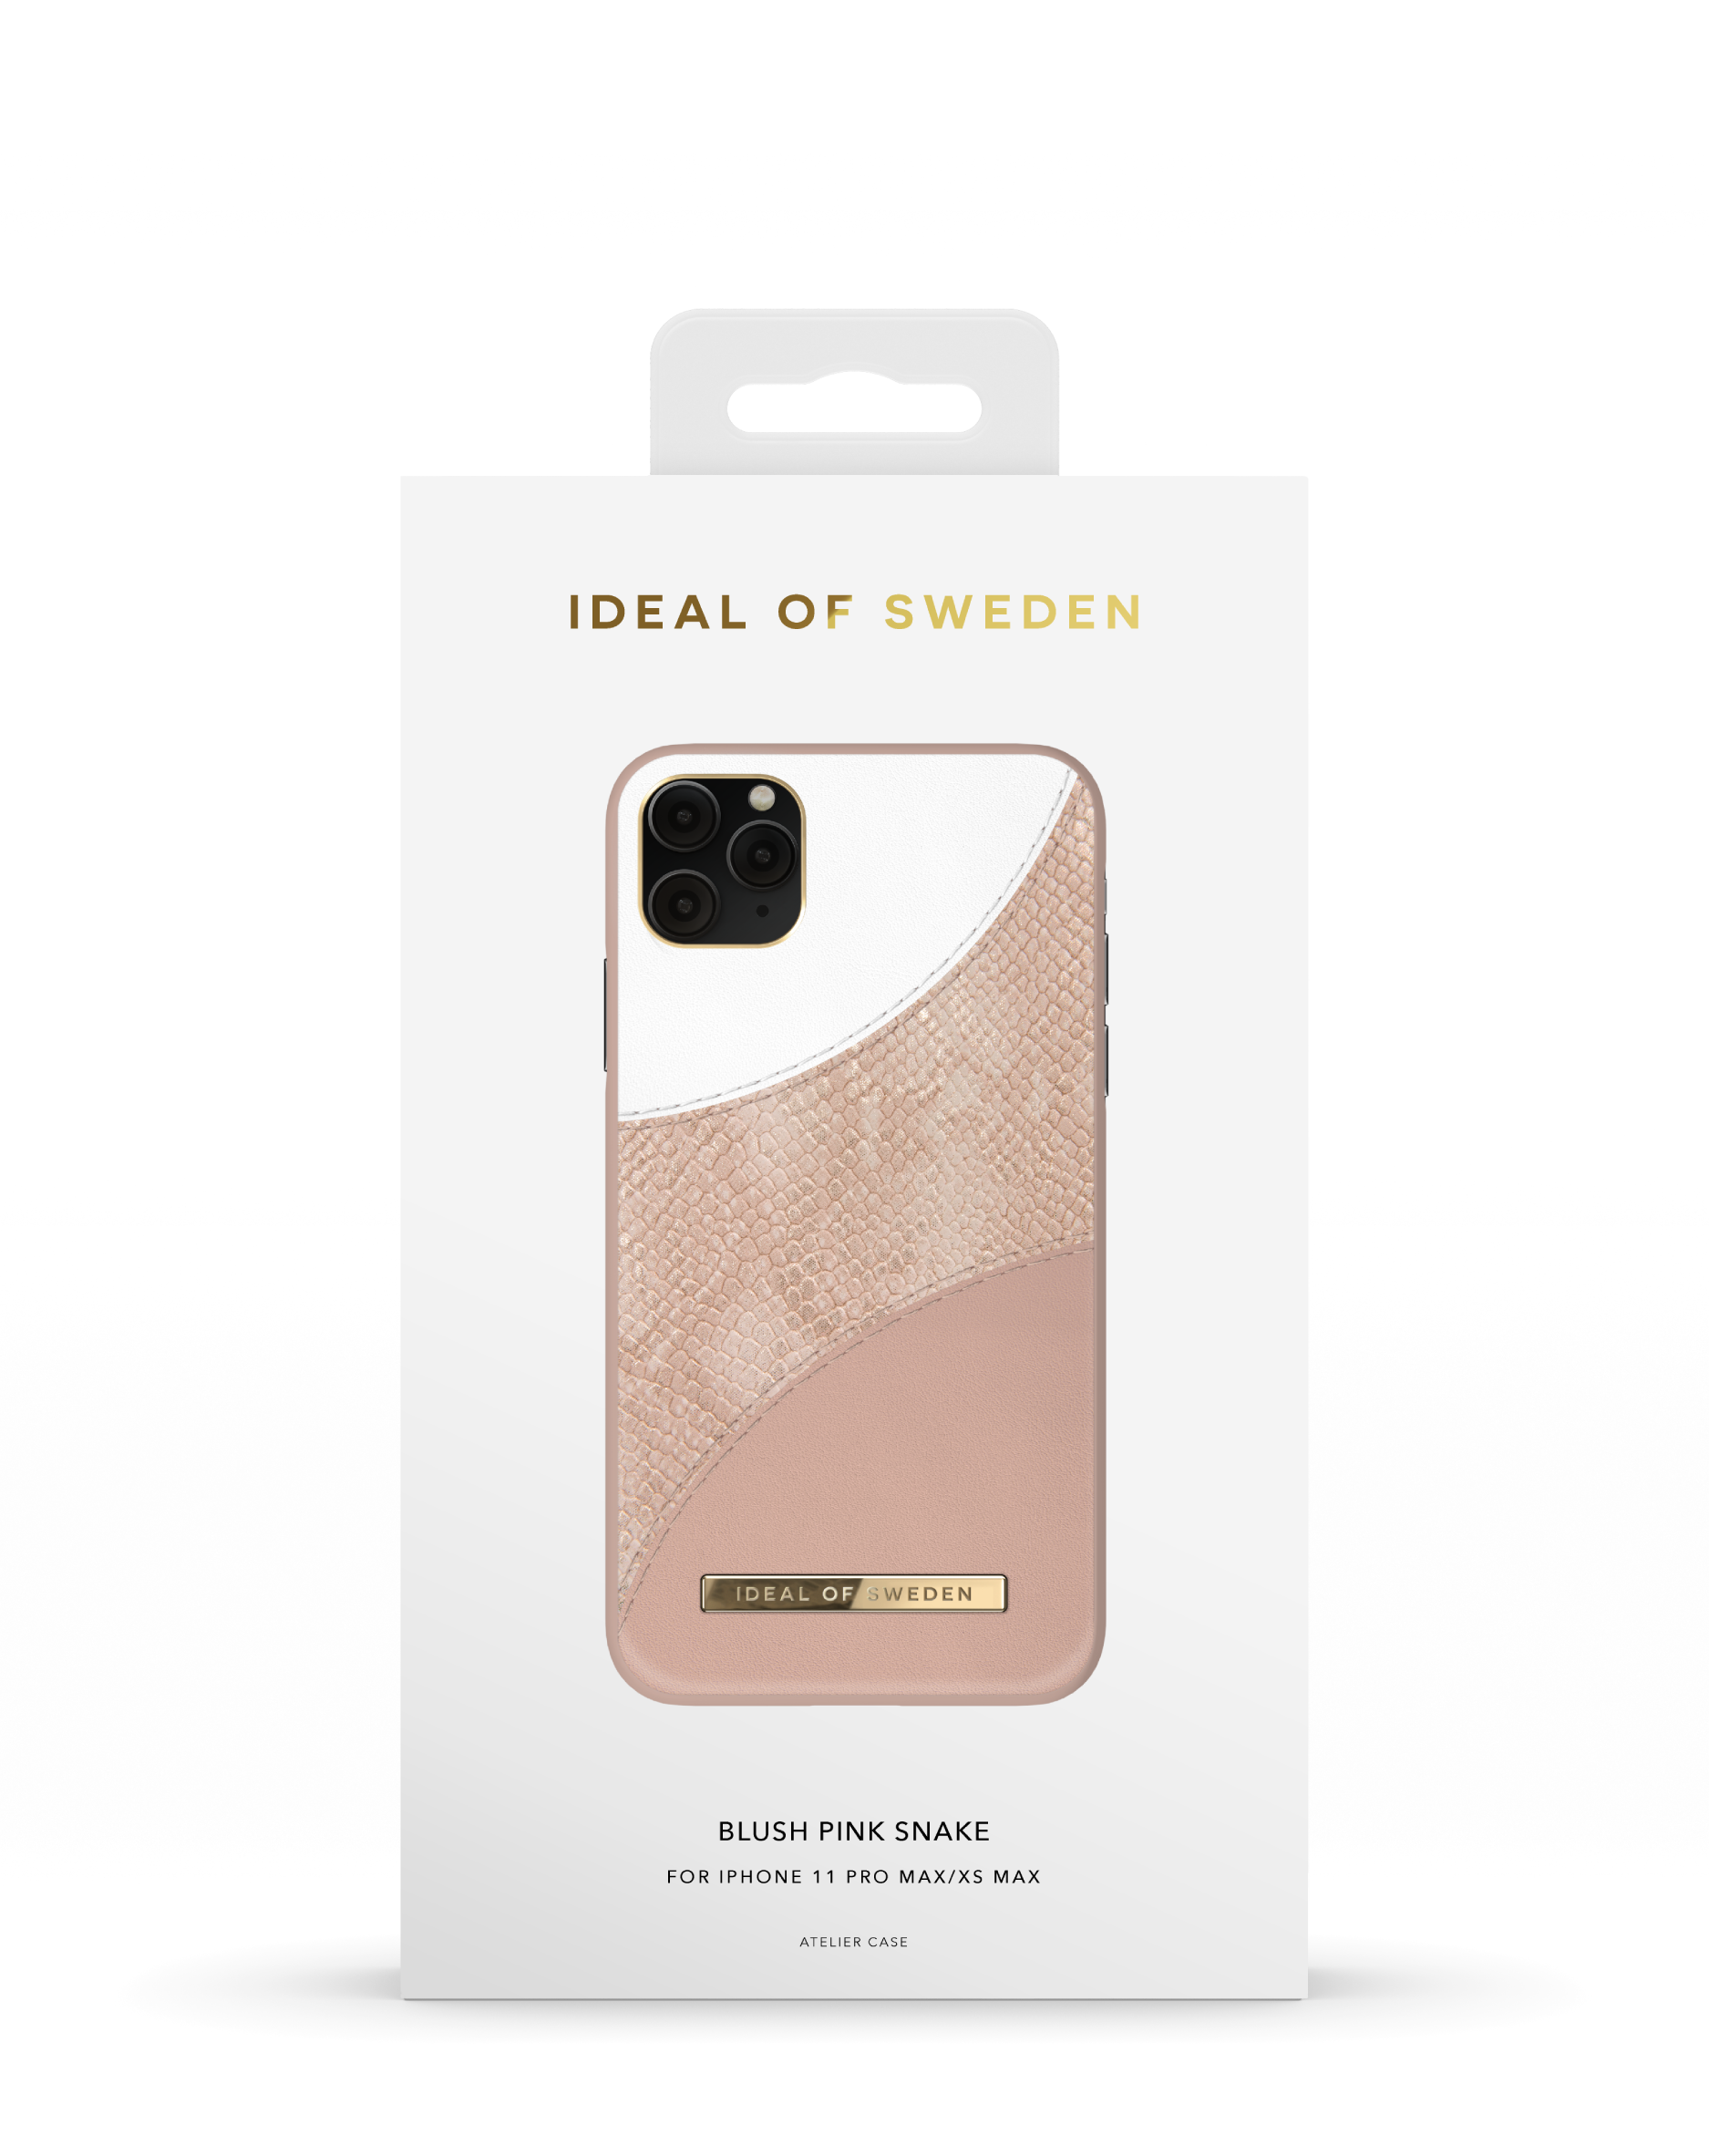 IDEAL OF SWEDEN Apple IDACSS21-I1965-269, Snake Backcover, Apple Max, Max, 11 Pink Blush iPhone Pro iPhone Apple, XS